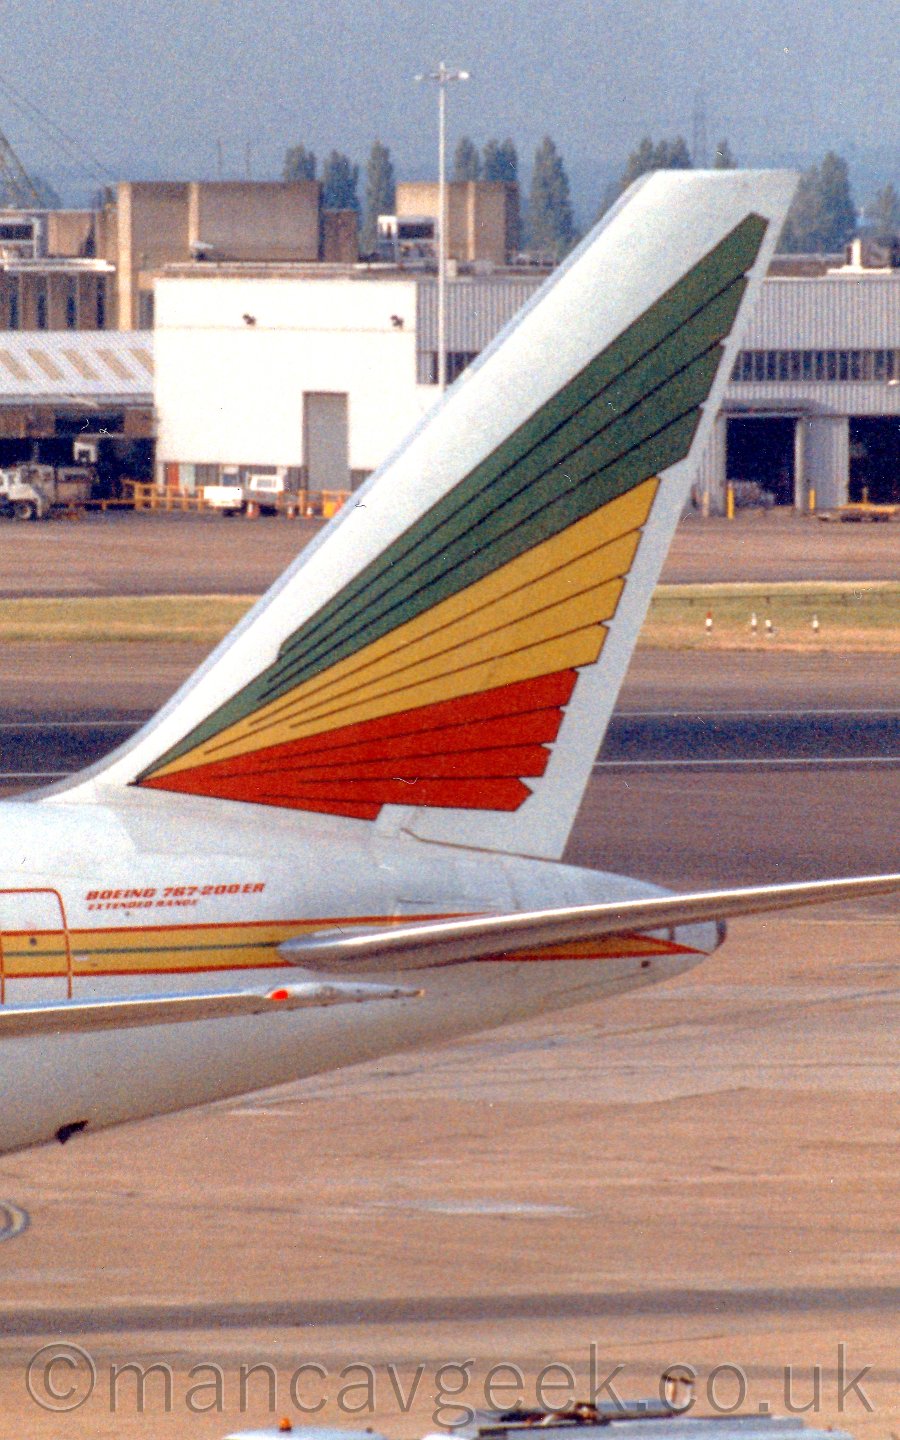 Close up of the tail and rear fuselage of a jet airliner taxiing to the left. The plane is mostly white, with a hellow stripe outlined in red running along the body, and green, yellow, and red stylised wing feathers on the white tail. Thewre are "Boeing 7676-200ER Extended Range" titles on the upper rear fuselage. In the background, a large white building takes up a good chunk of the frame, especially on the right, with another brown buiding behind it and to the left., with grey-blue skies above.